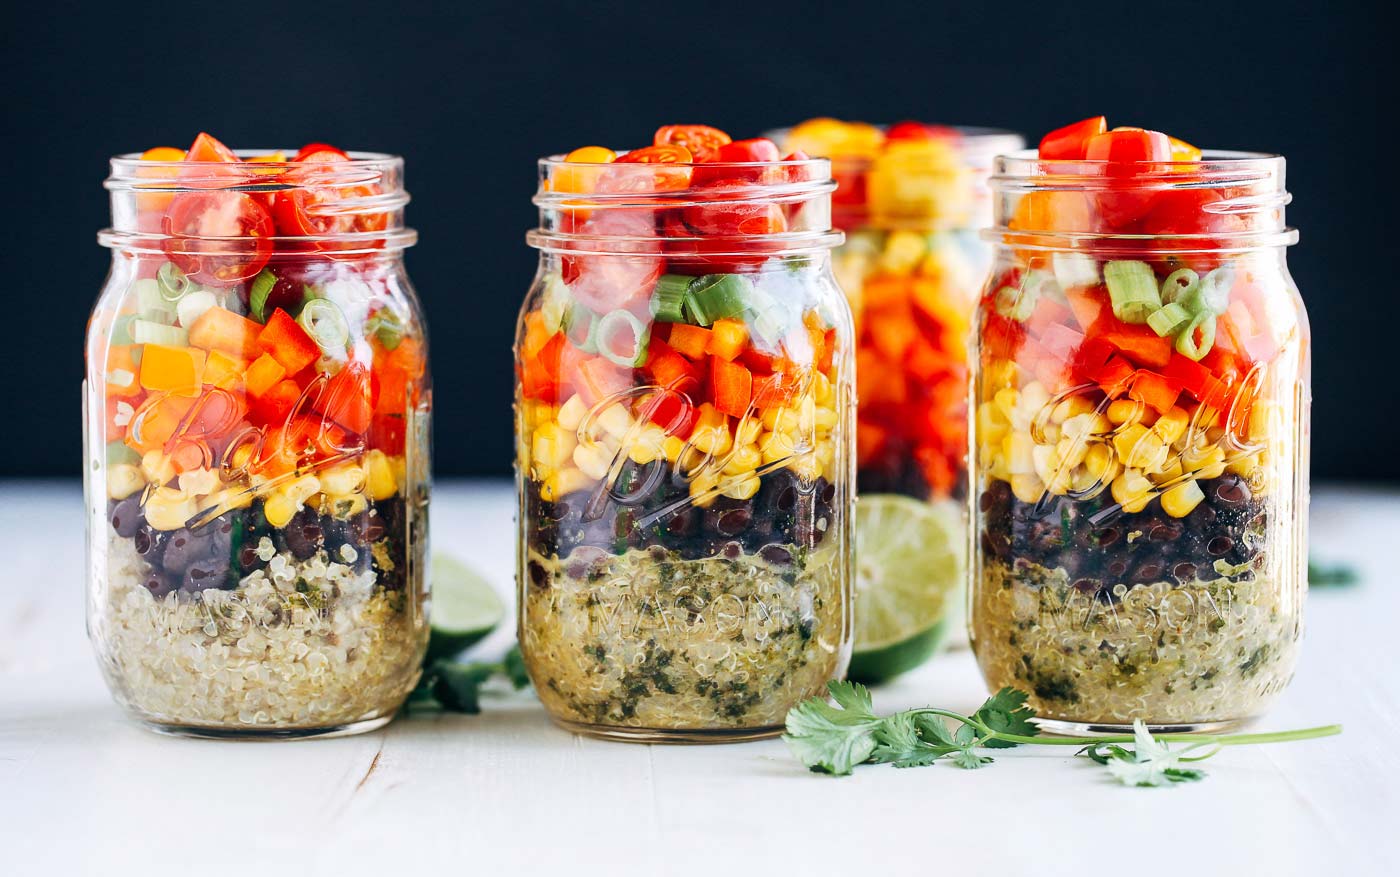 Only a Truly Cool Person Will Have Eaten at Least 13/25 of These Foods Mason Jar Salads